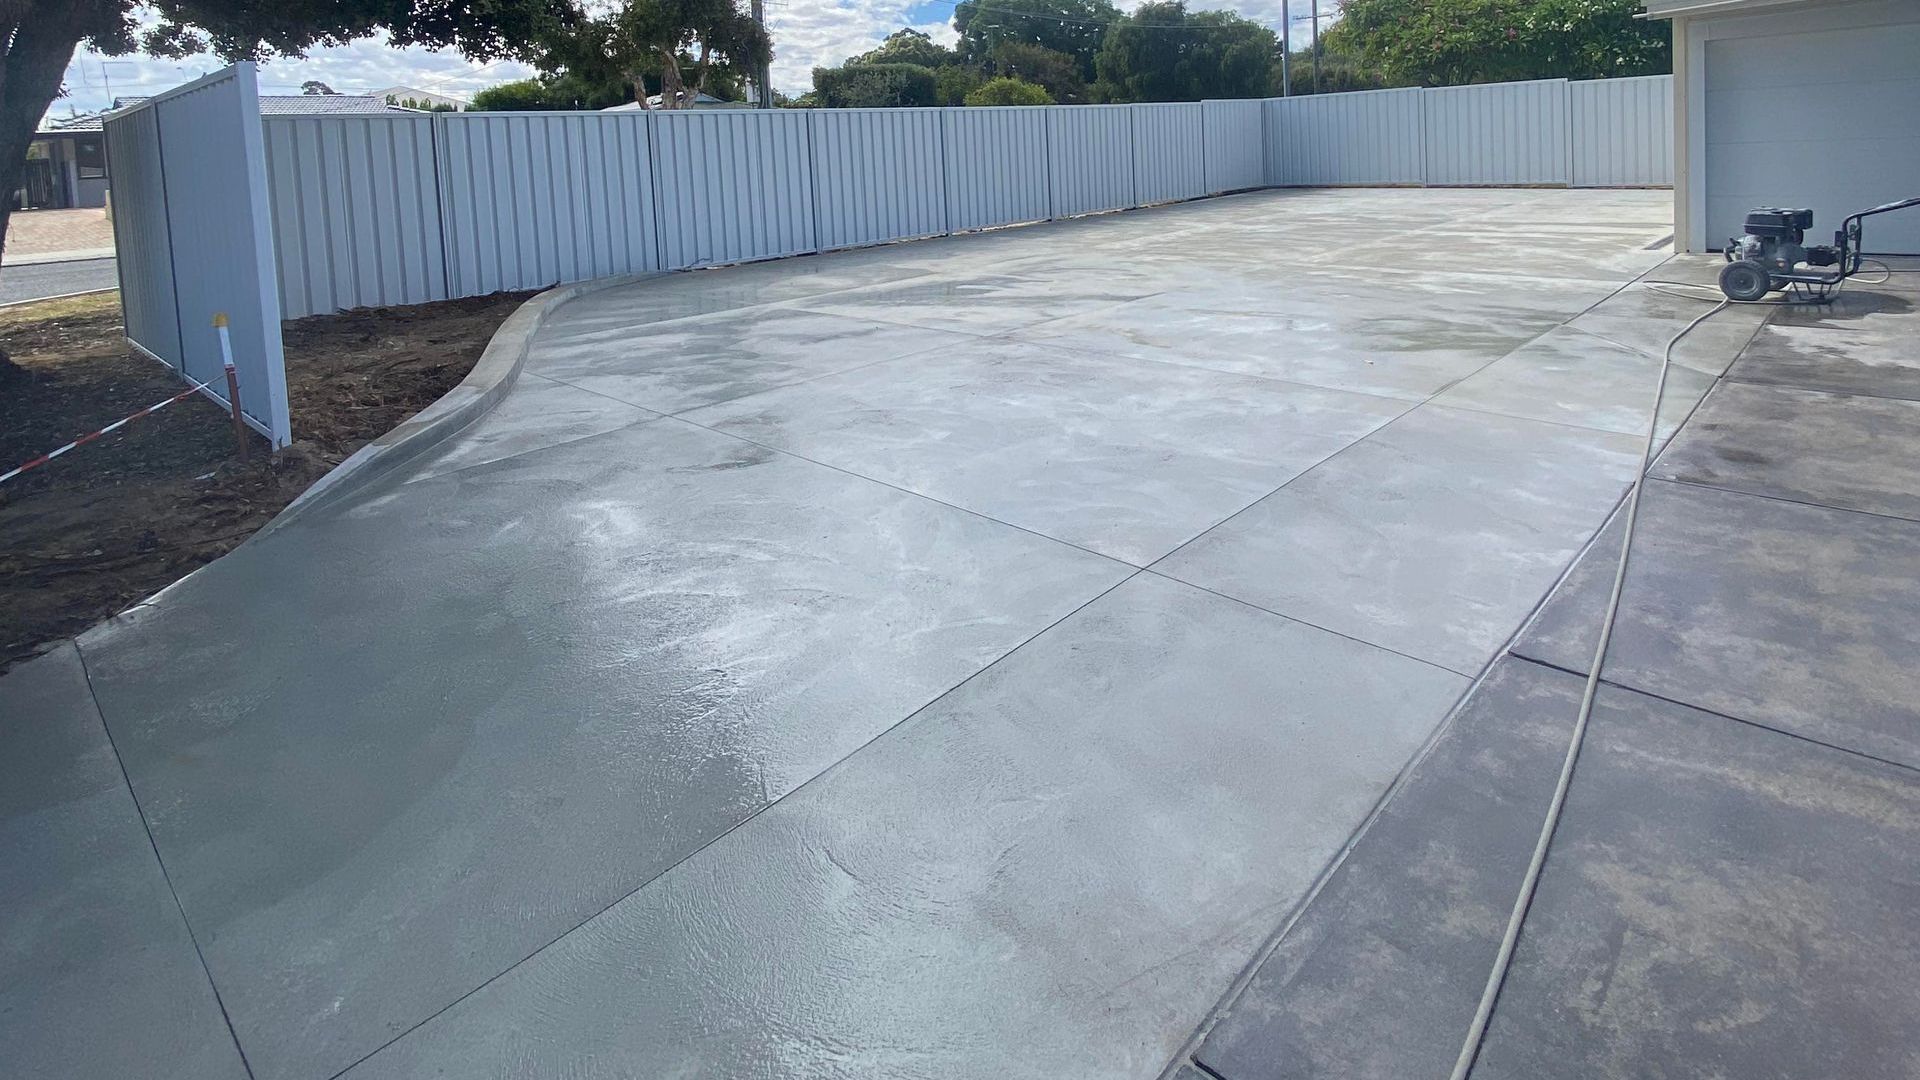 New standard concrete driveway for Perth property